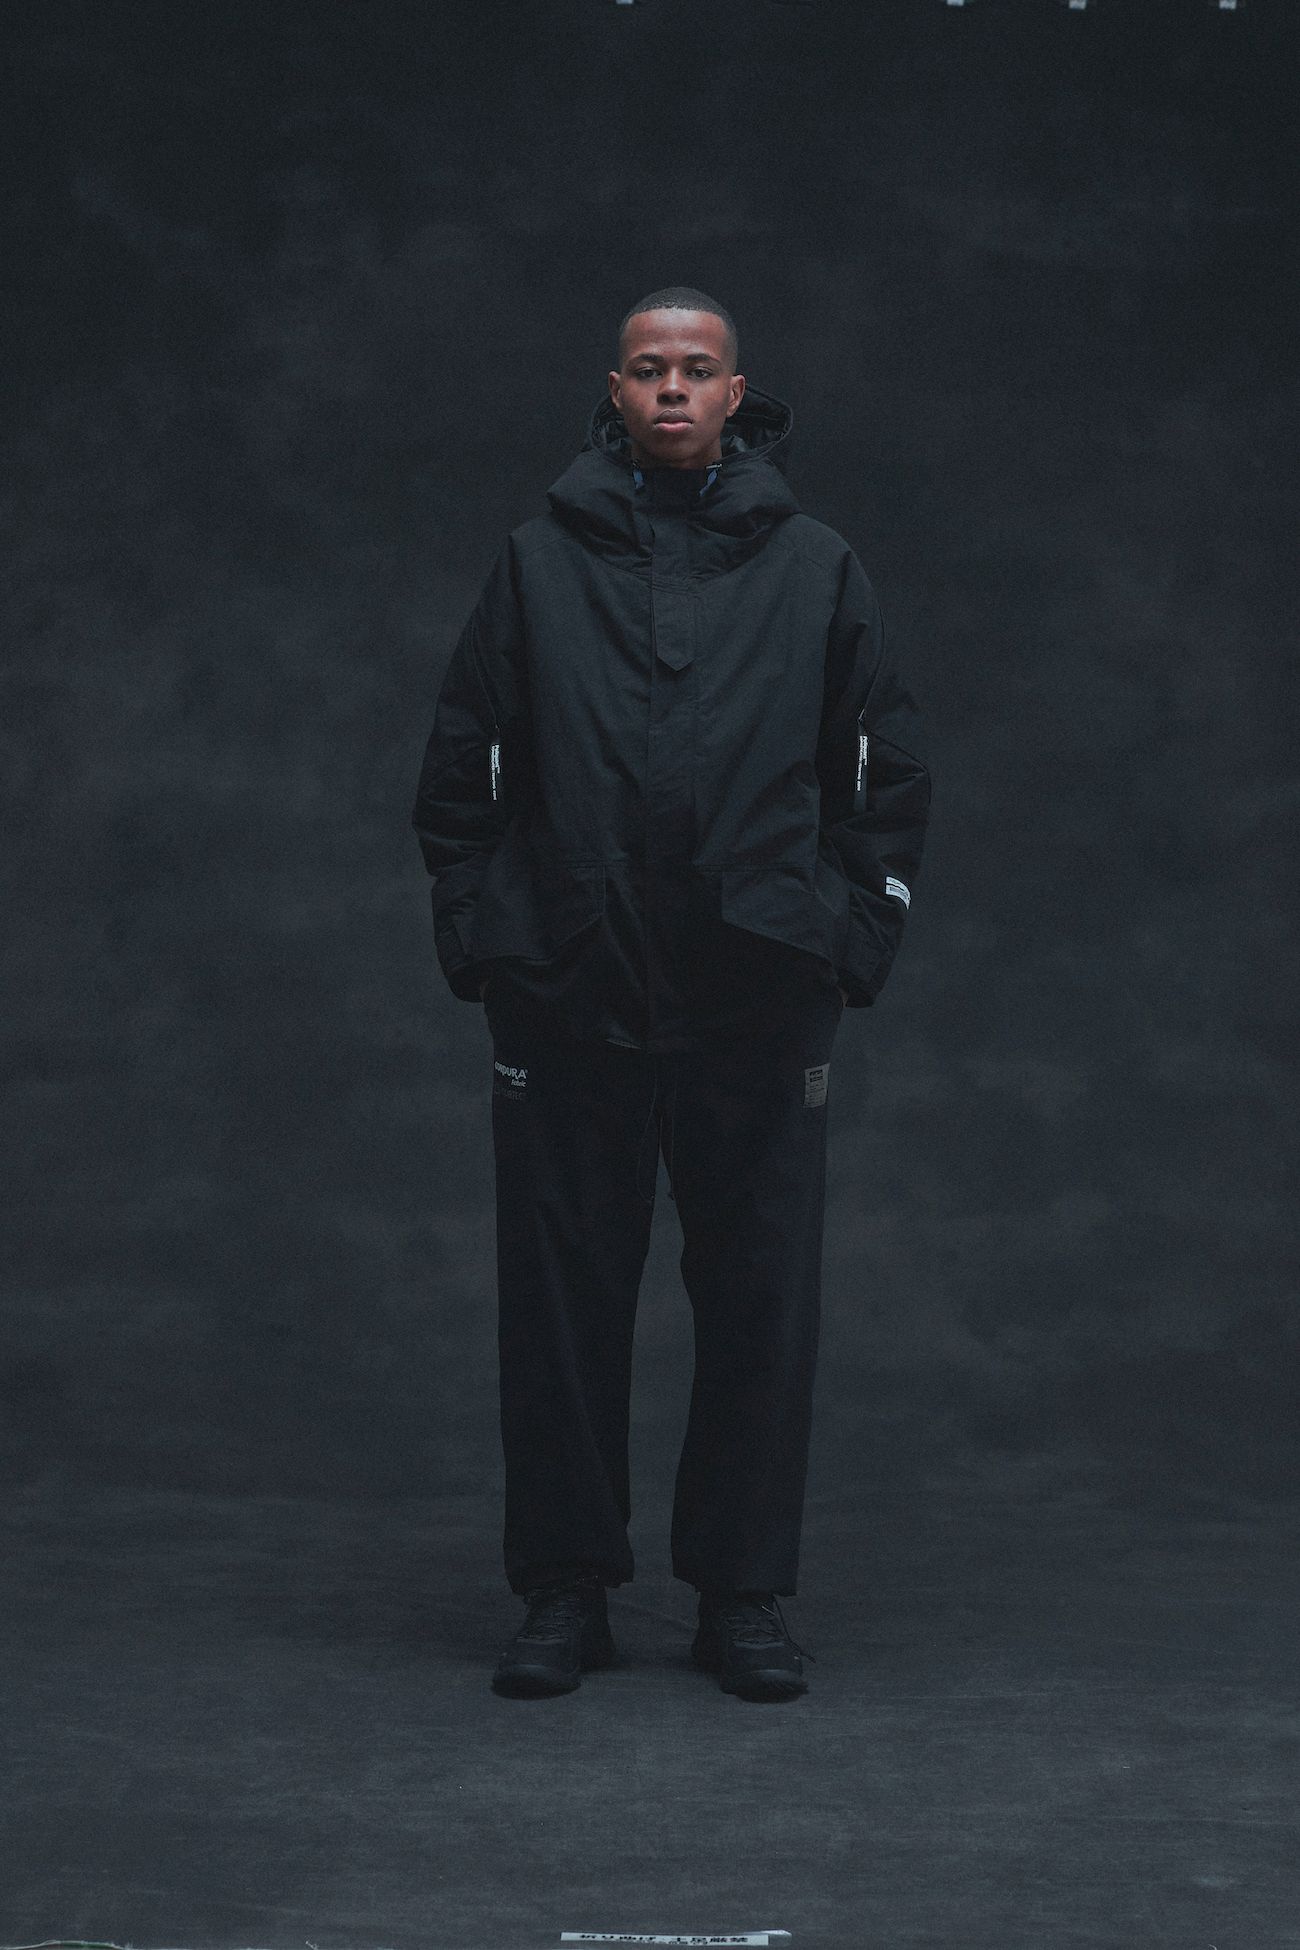 POLIQUANT - THE E.C.W.C.S. DEFORMING HOODED PADDING FIELD JACKET